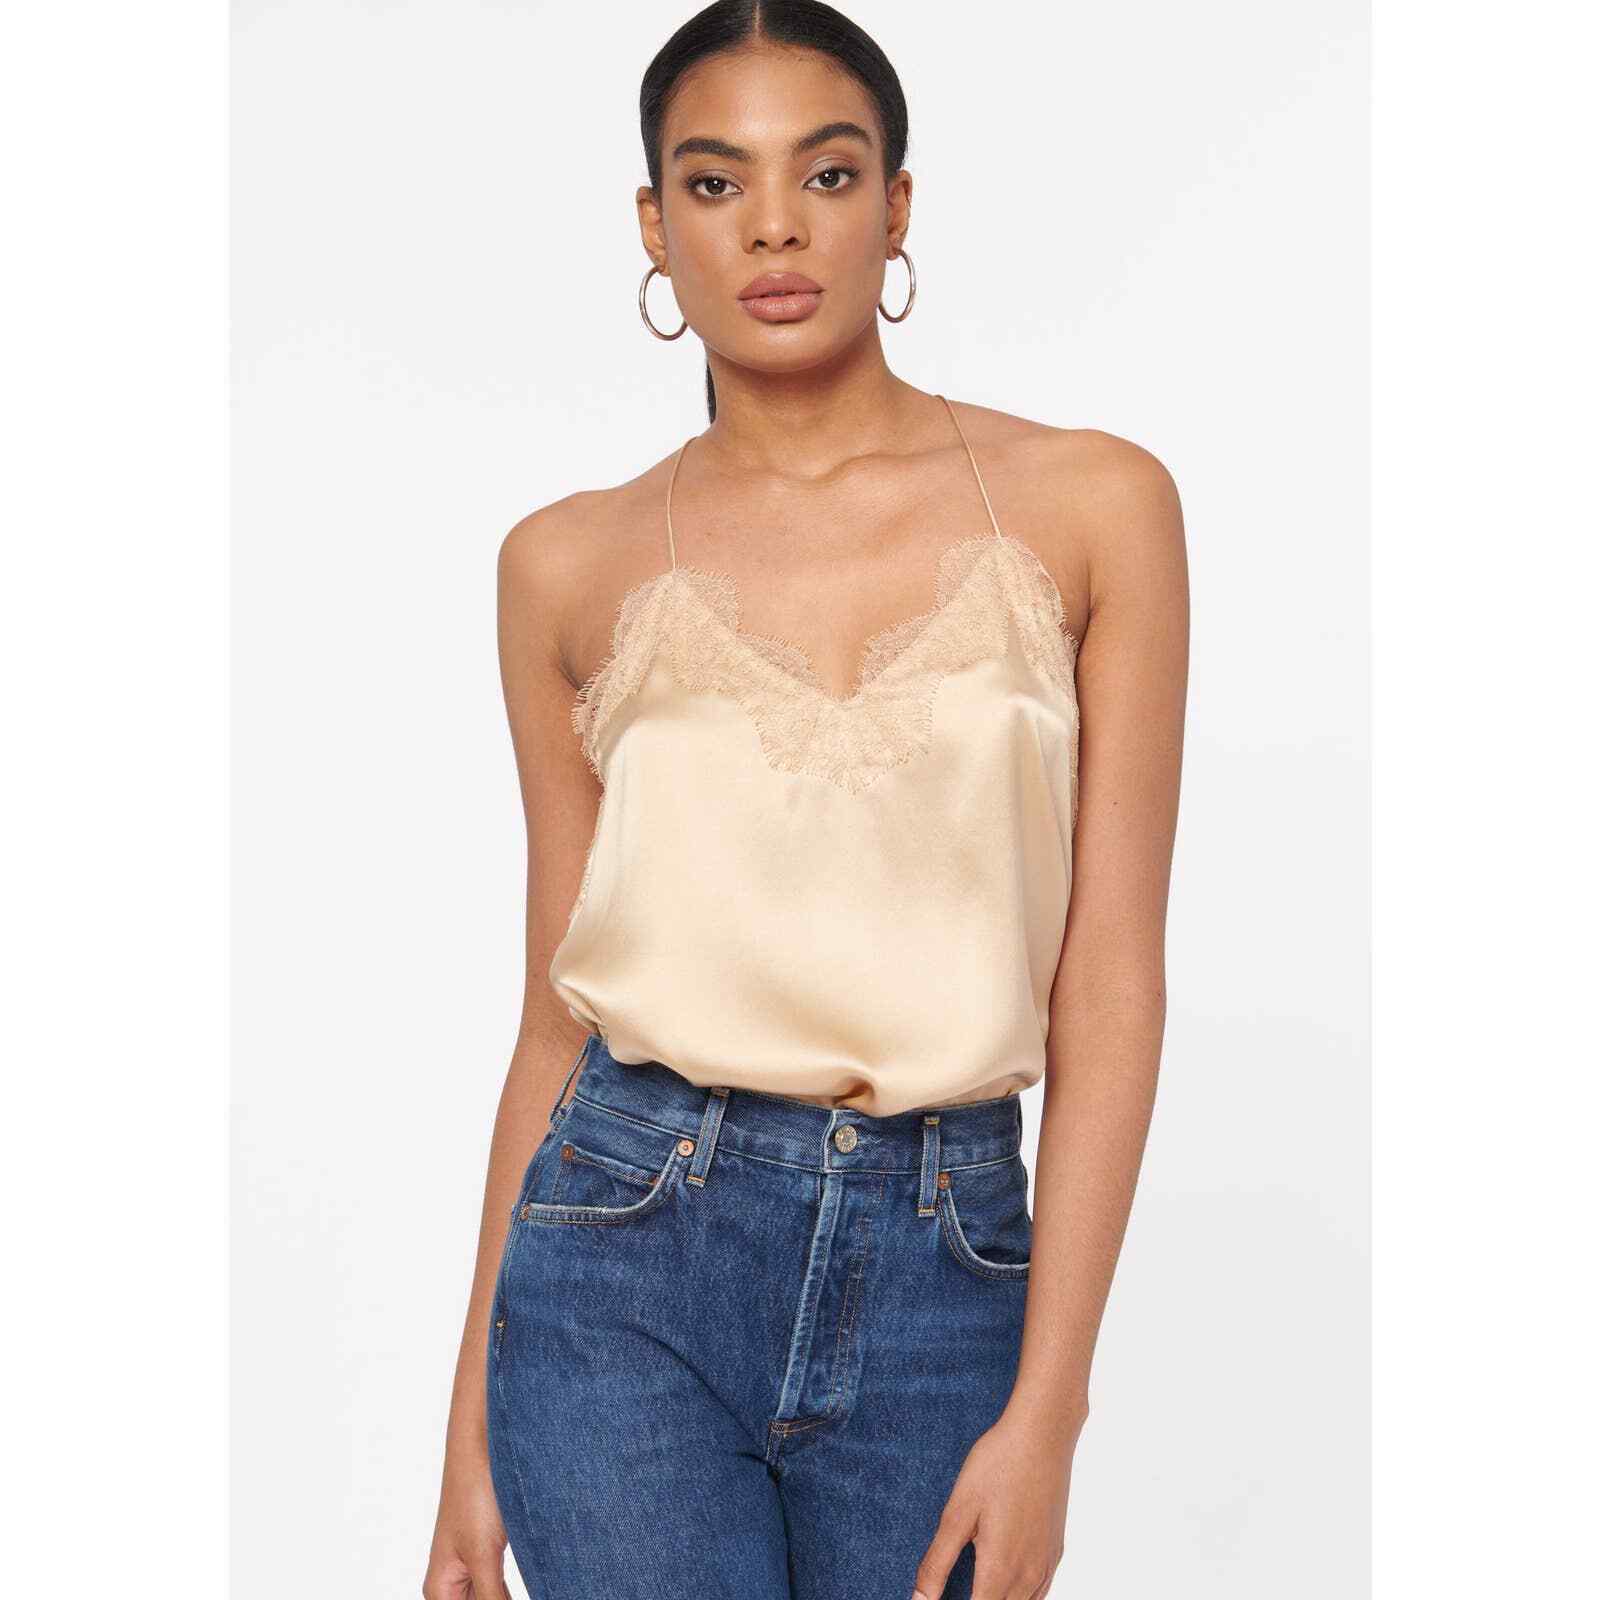 https://snazzyway.com/wp-content/uploads/2023/03/Cami-NYC-Racer-Charmeuse-Top-Womens.jpg